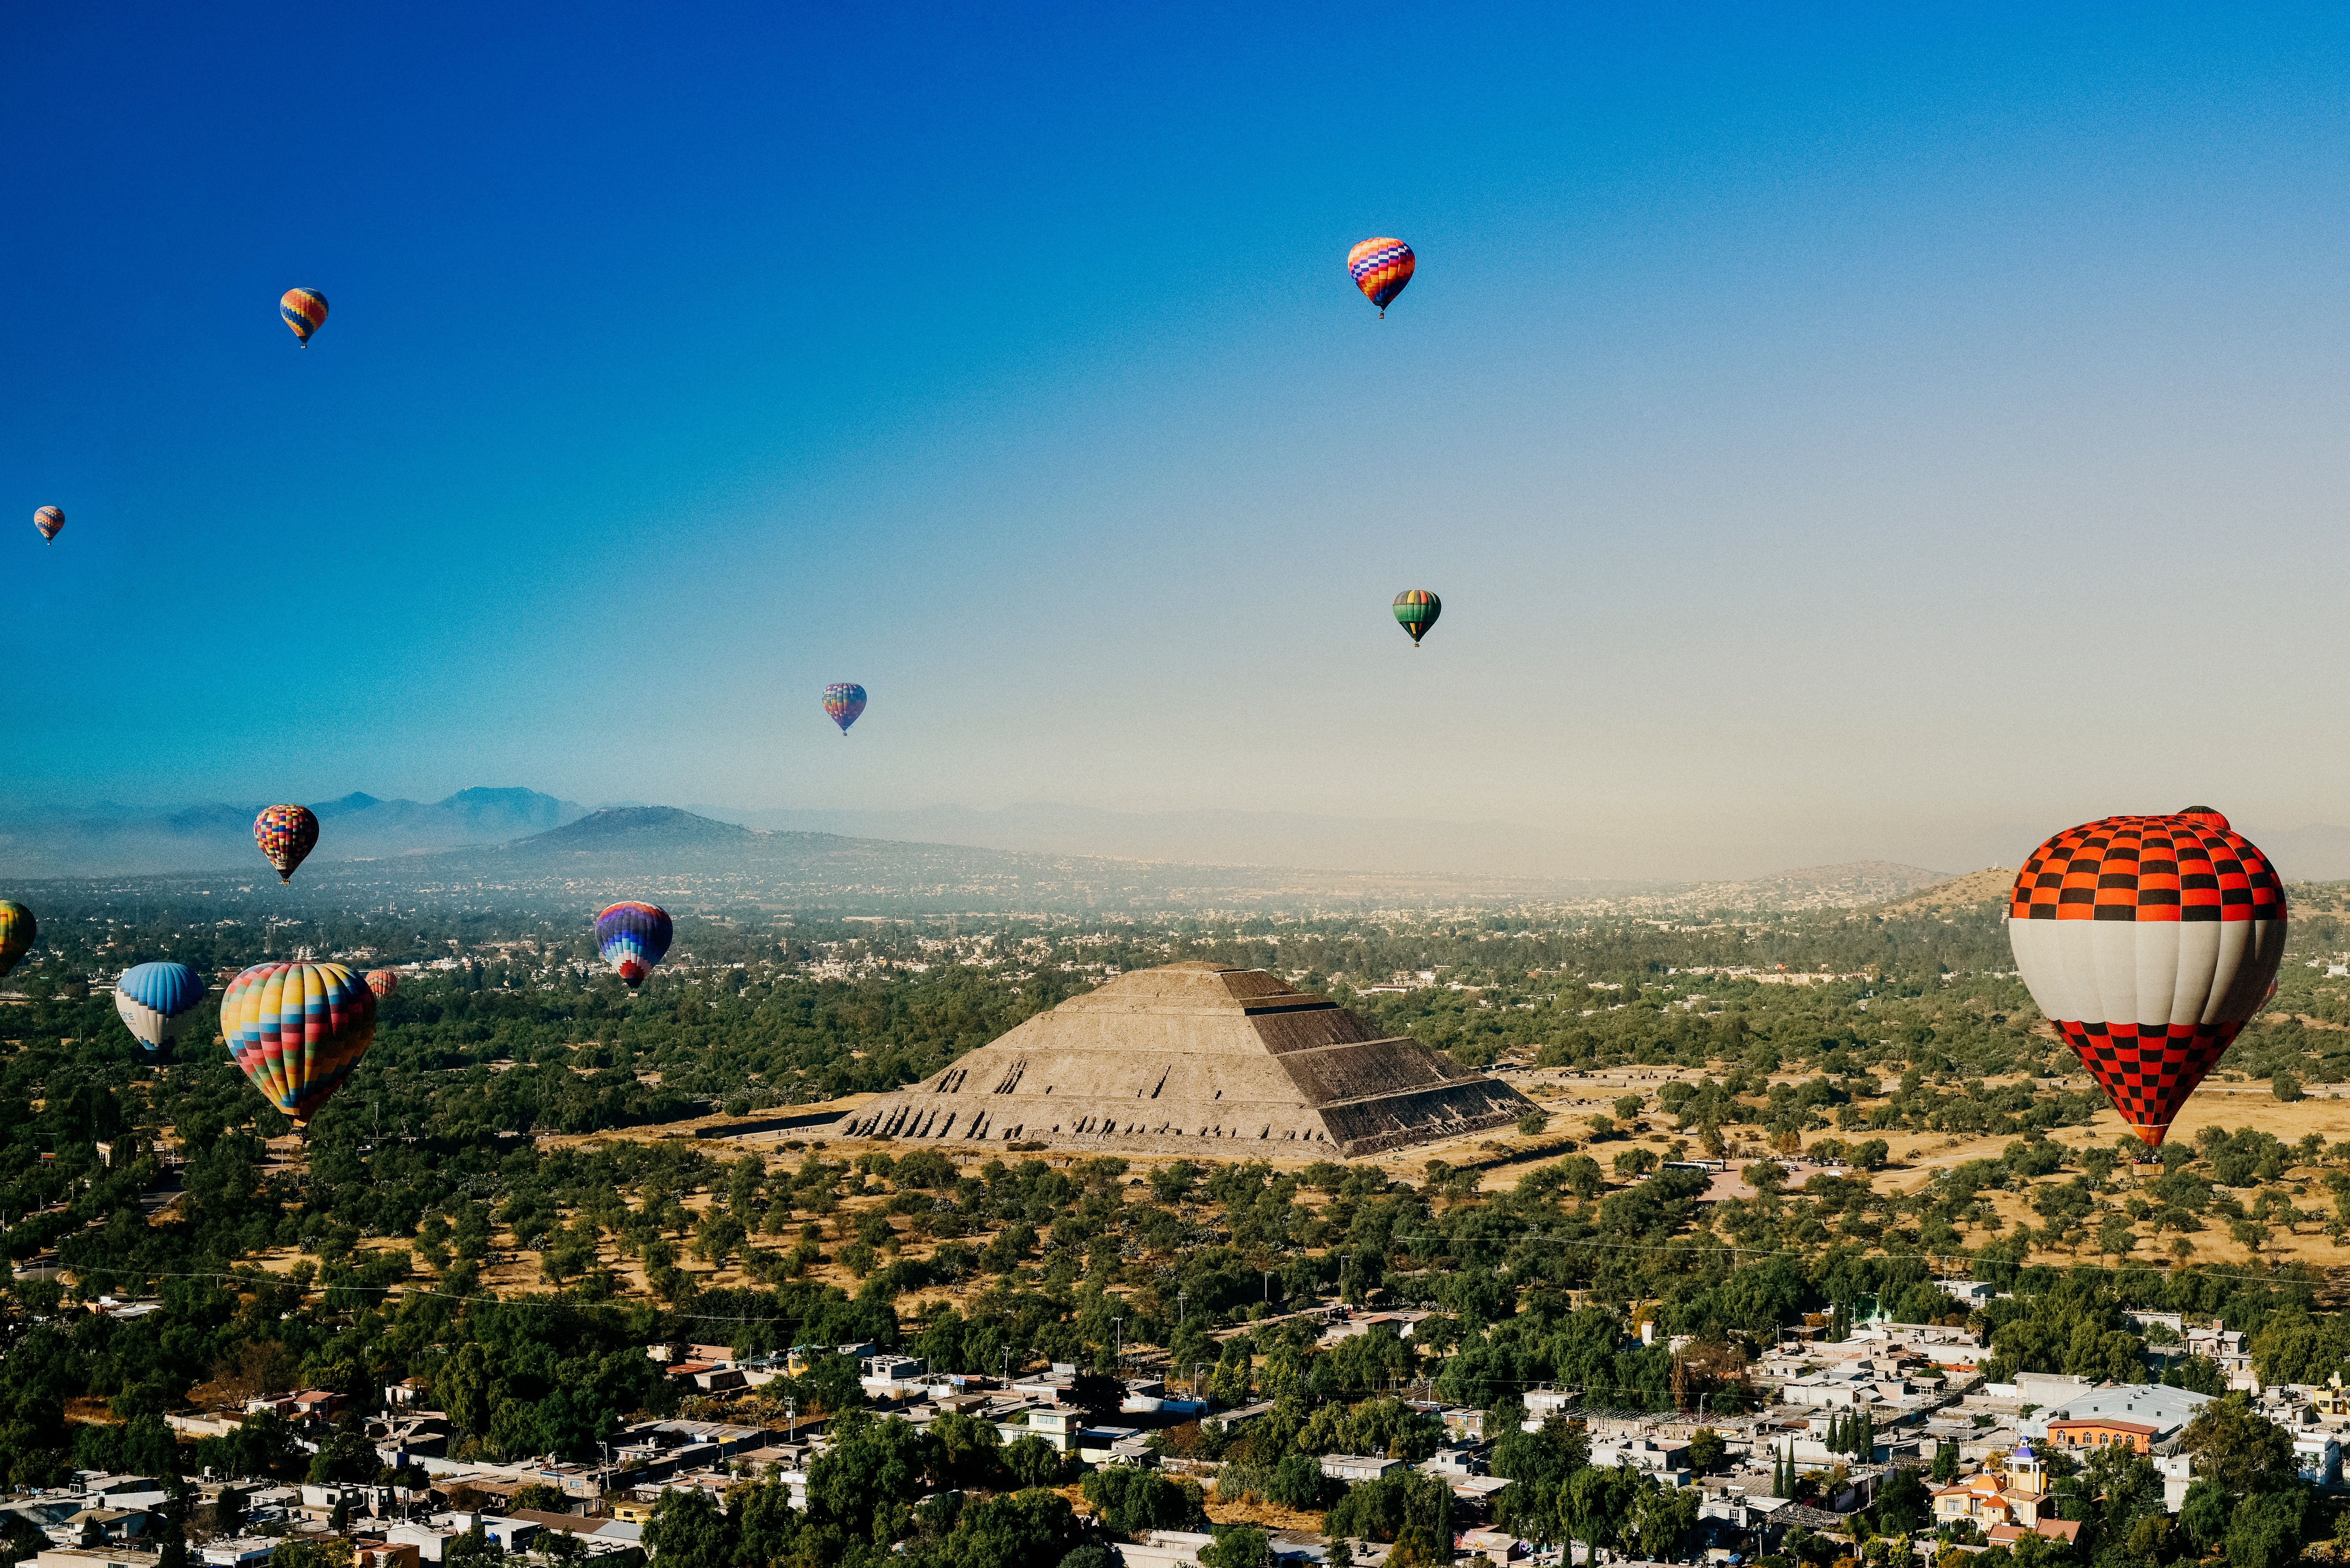 Sunrise with hot air balloons flying over the pyramid of the Sun, in Teotihuacan, Mexico